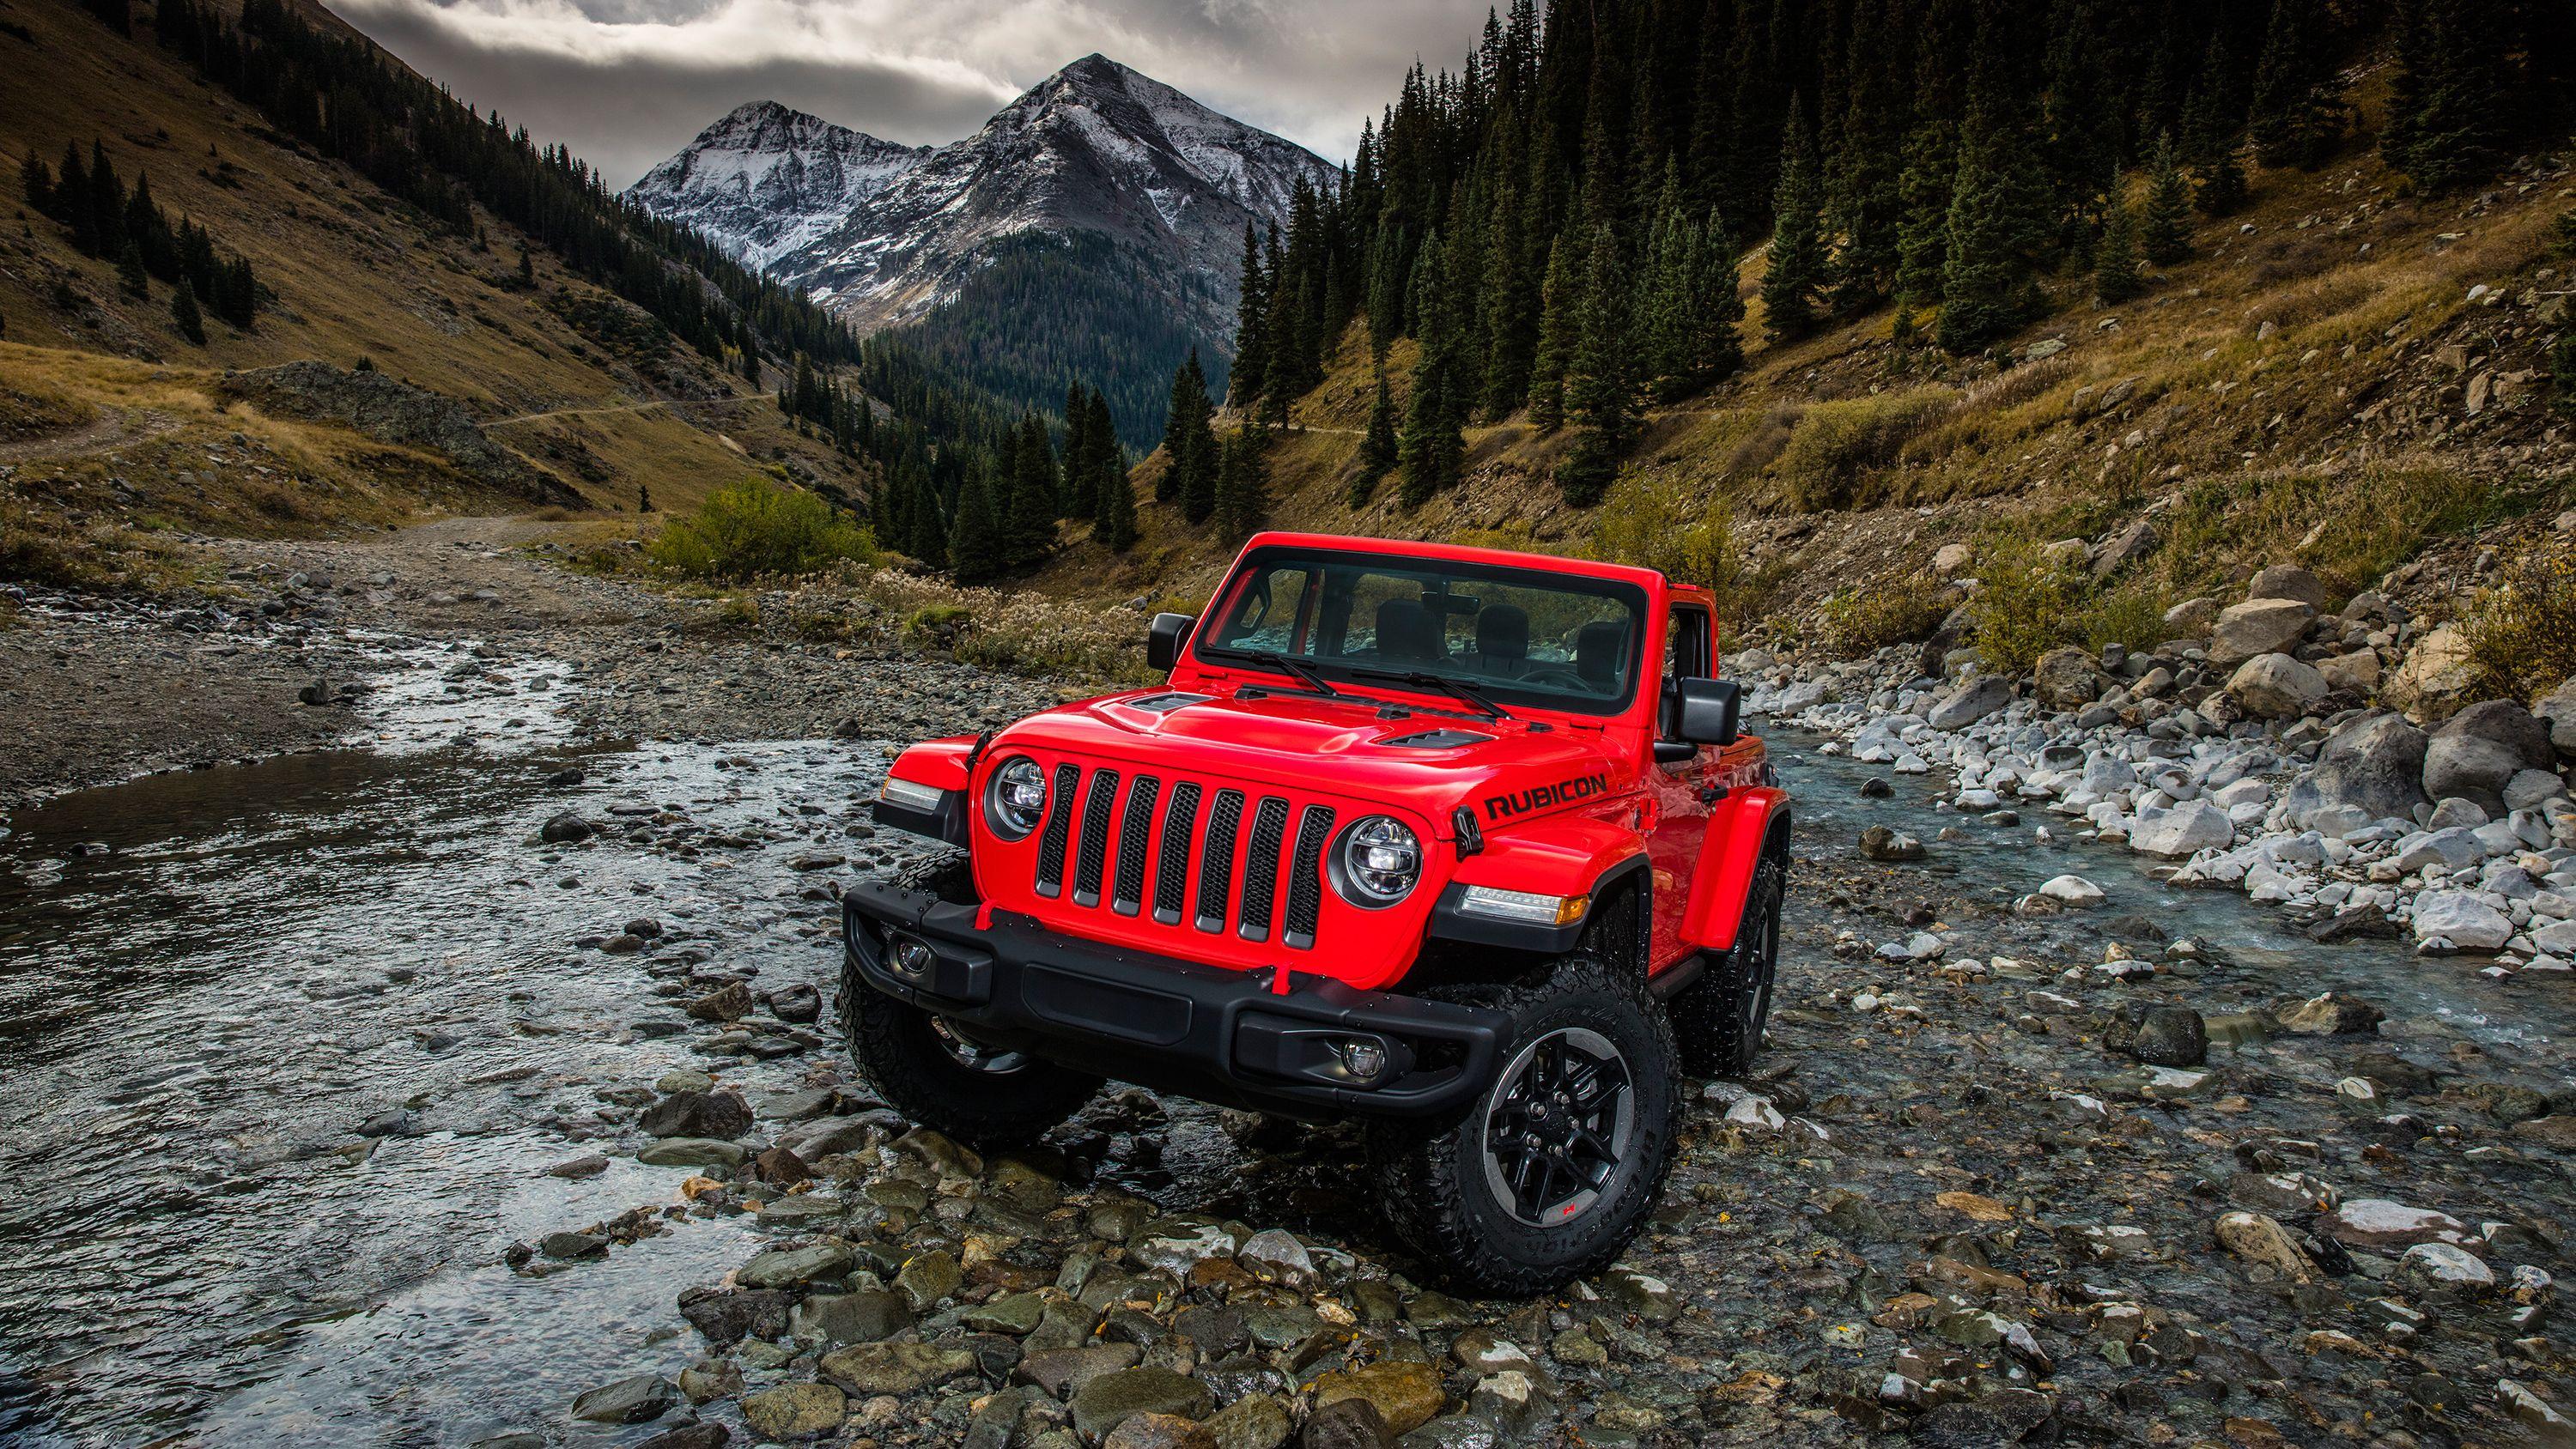 Jeep Wrangler Rubicon Wallpapers Top Free Jeep Wrangler Rubicon Backgrounds Wallpaperaccess